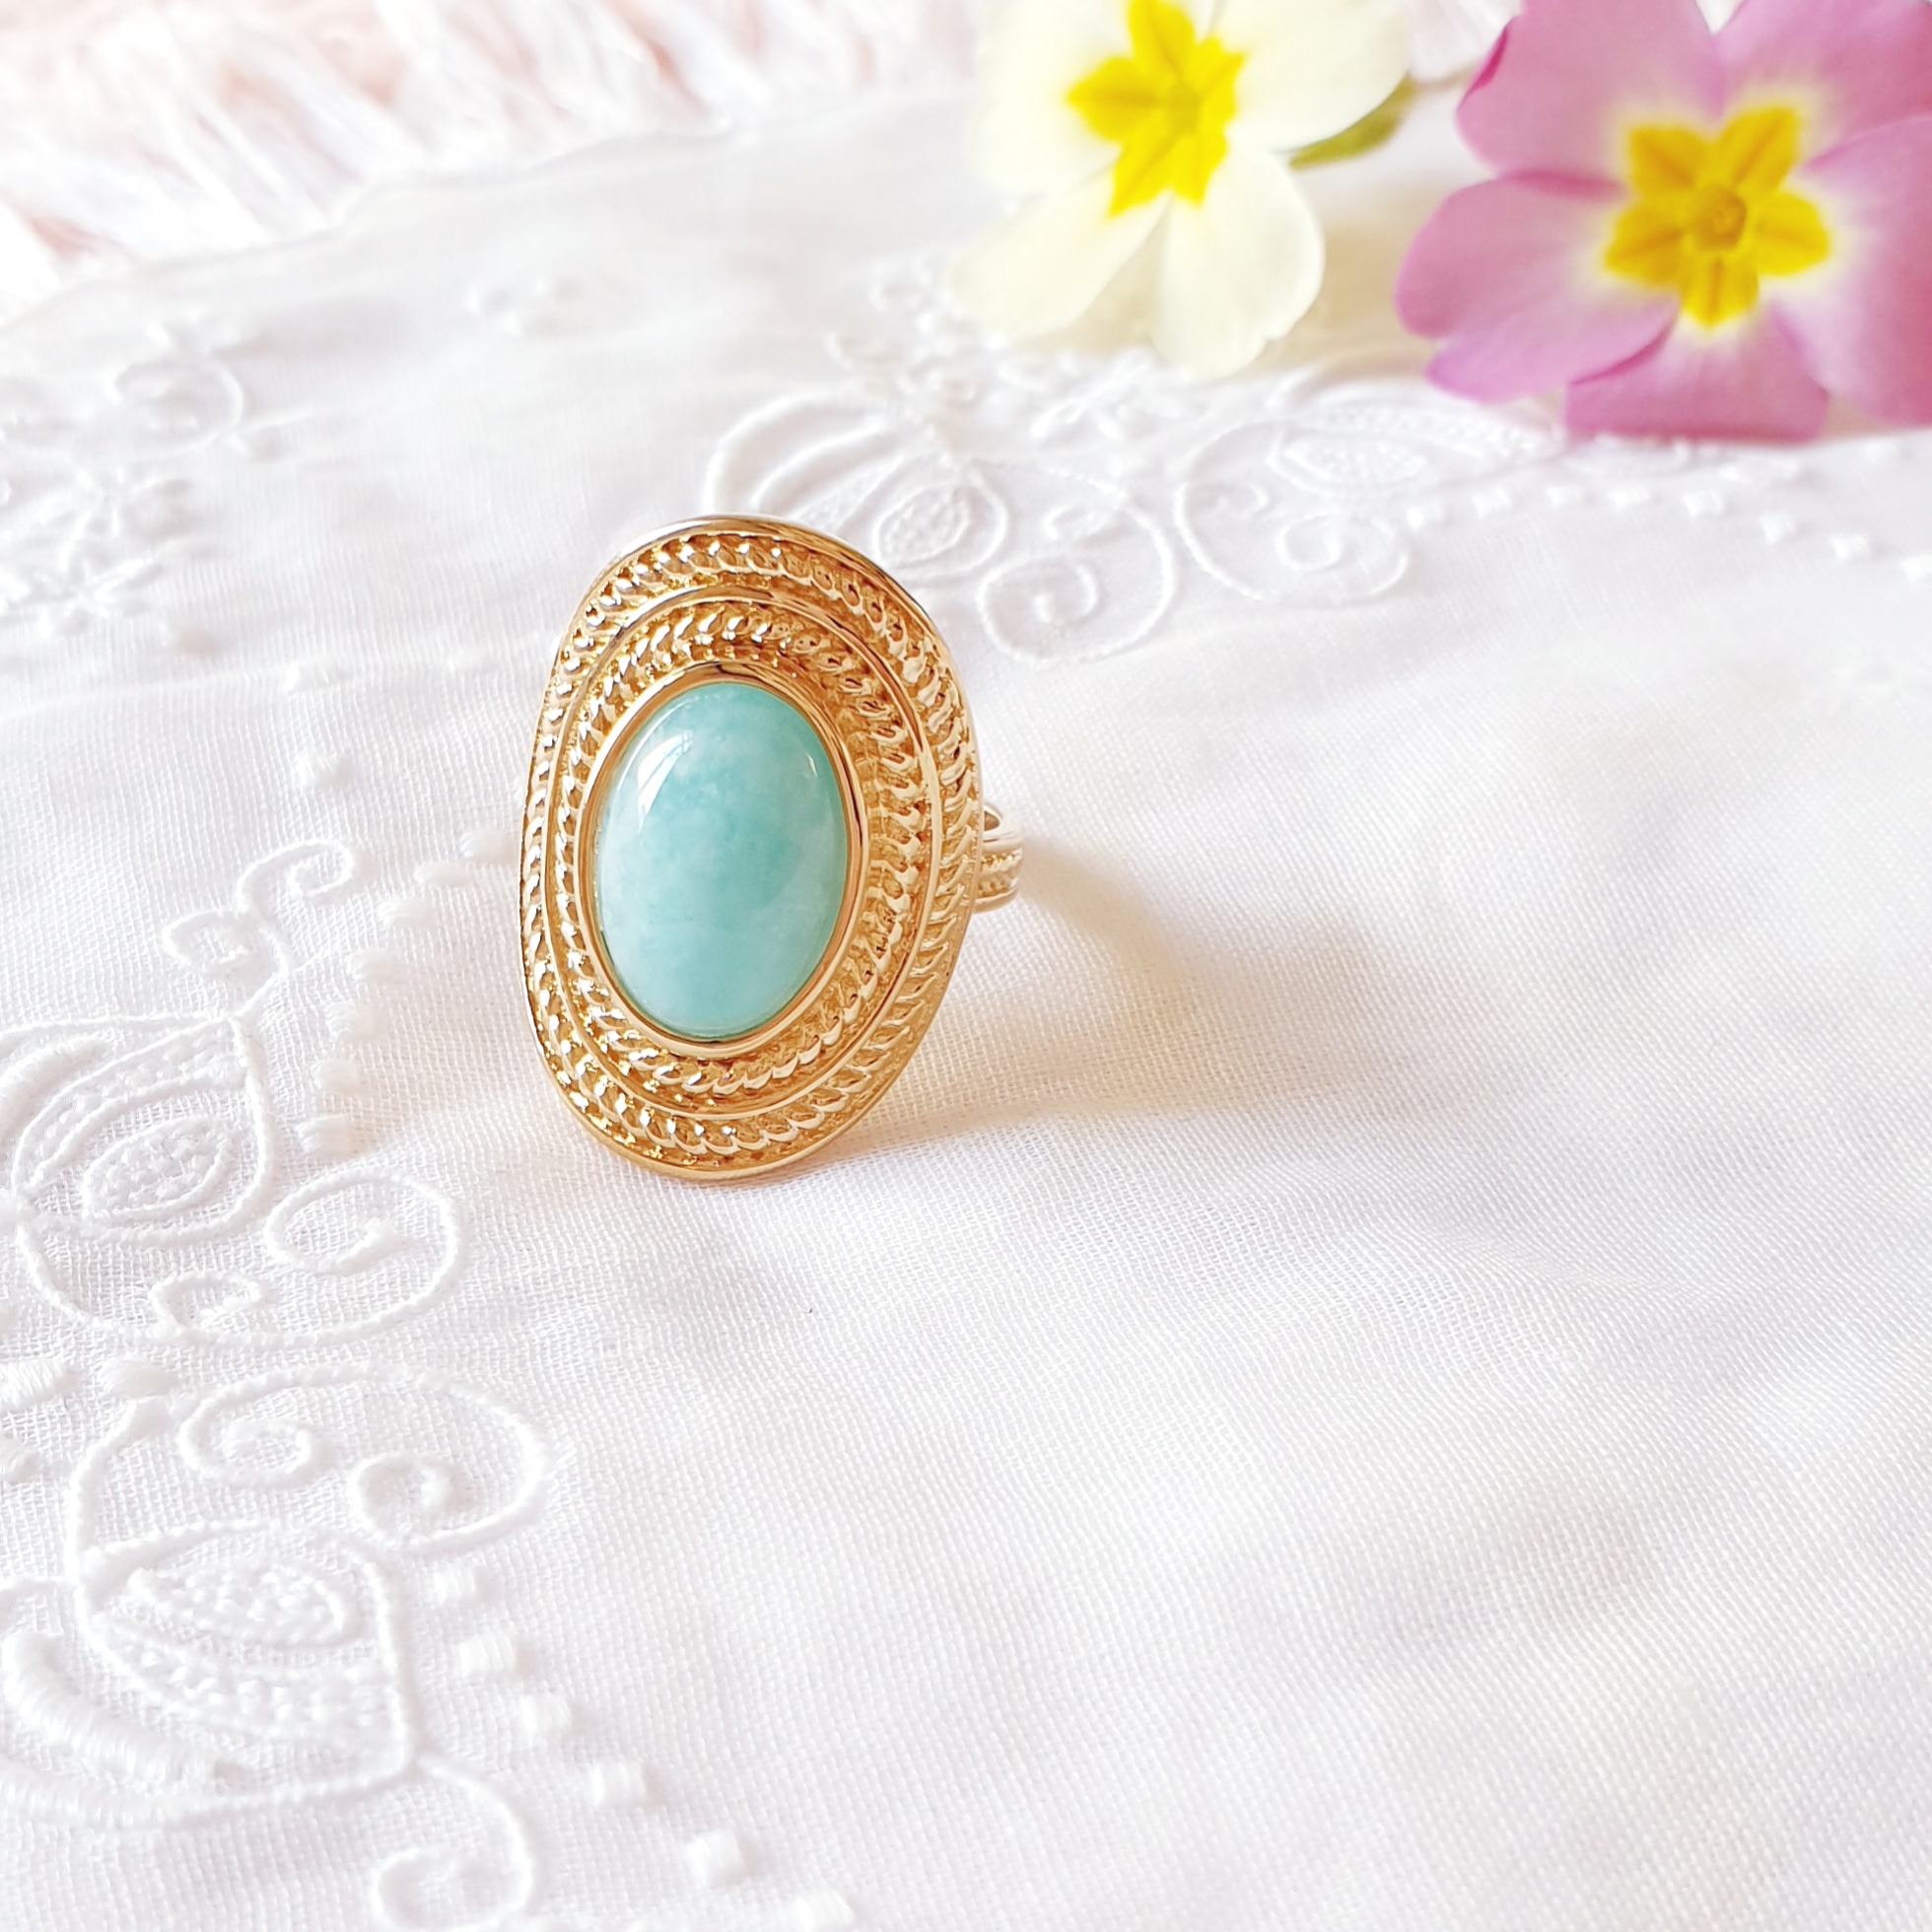 HIPPIE CHIC bague turquoise or